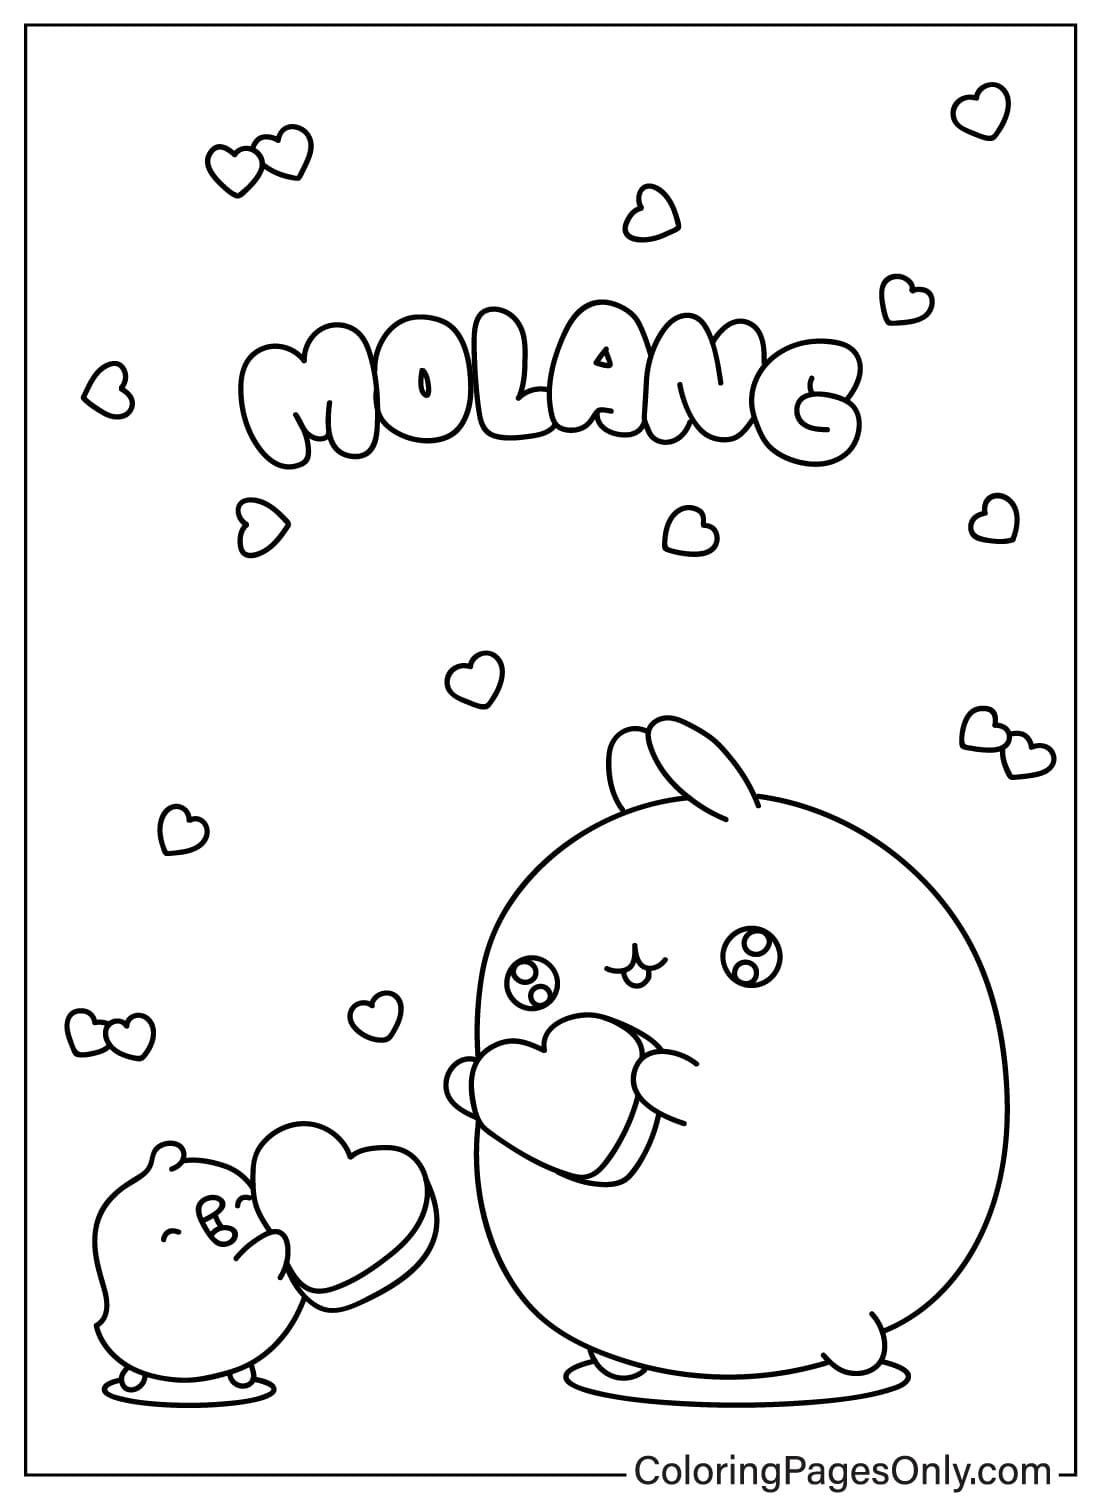 Molang and Piu Piu with Heart Coloring Page from Molang